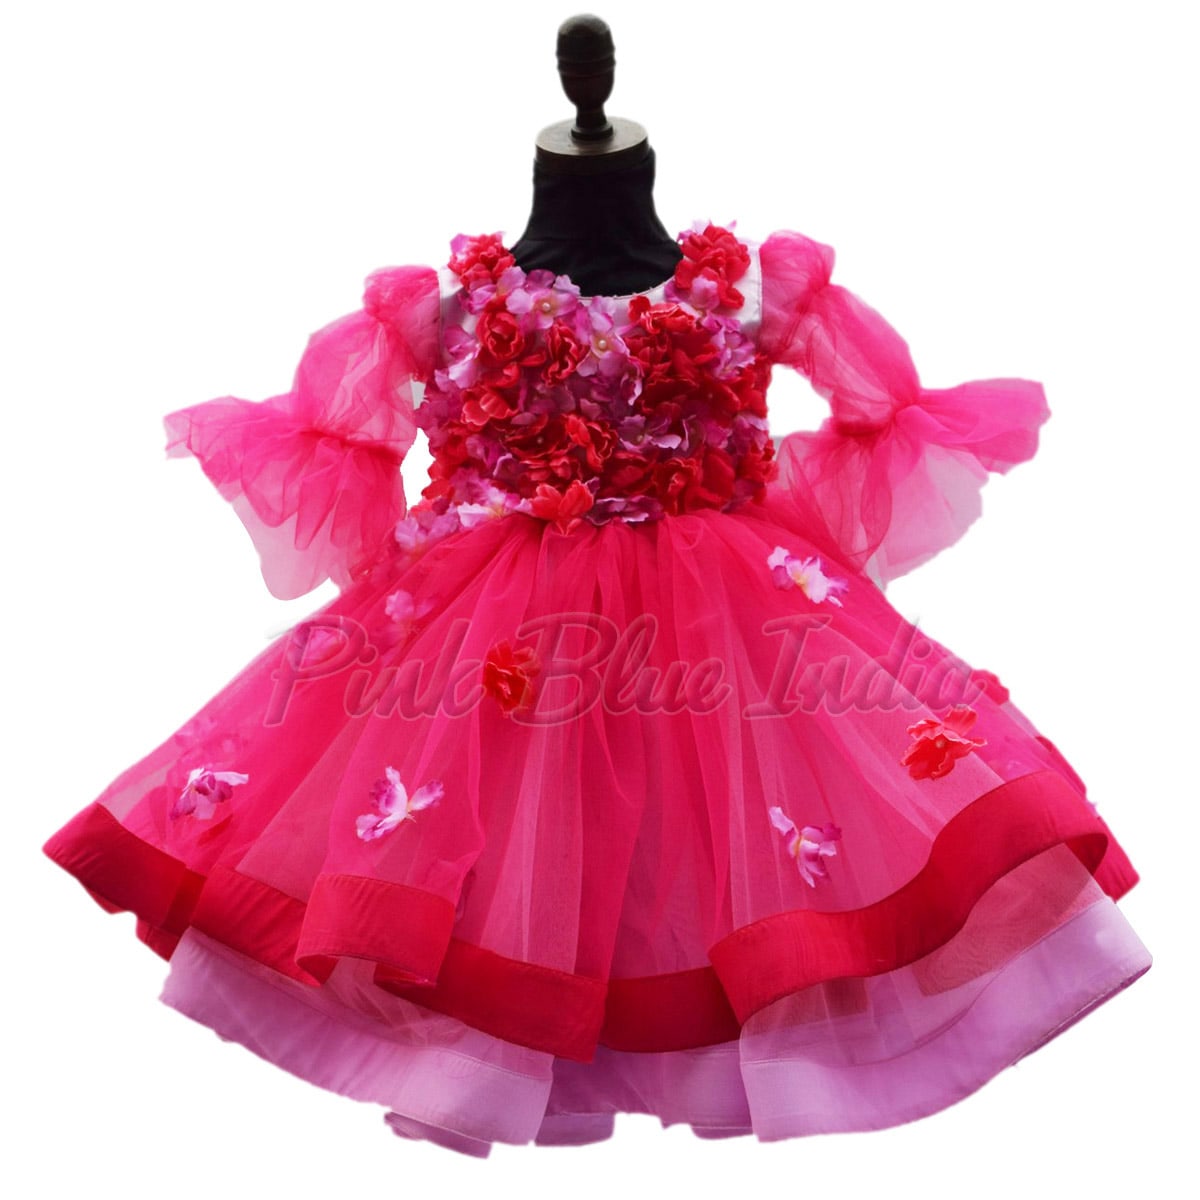 Balloon Sleeve Layered Birthday Gown for Girls Online